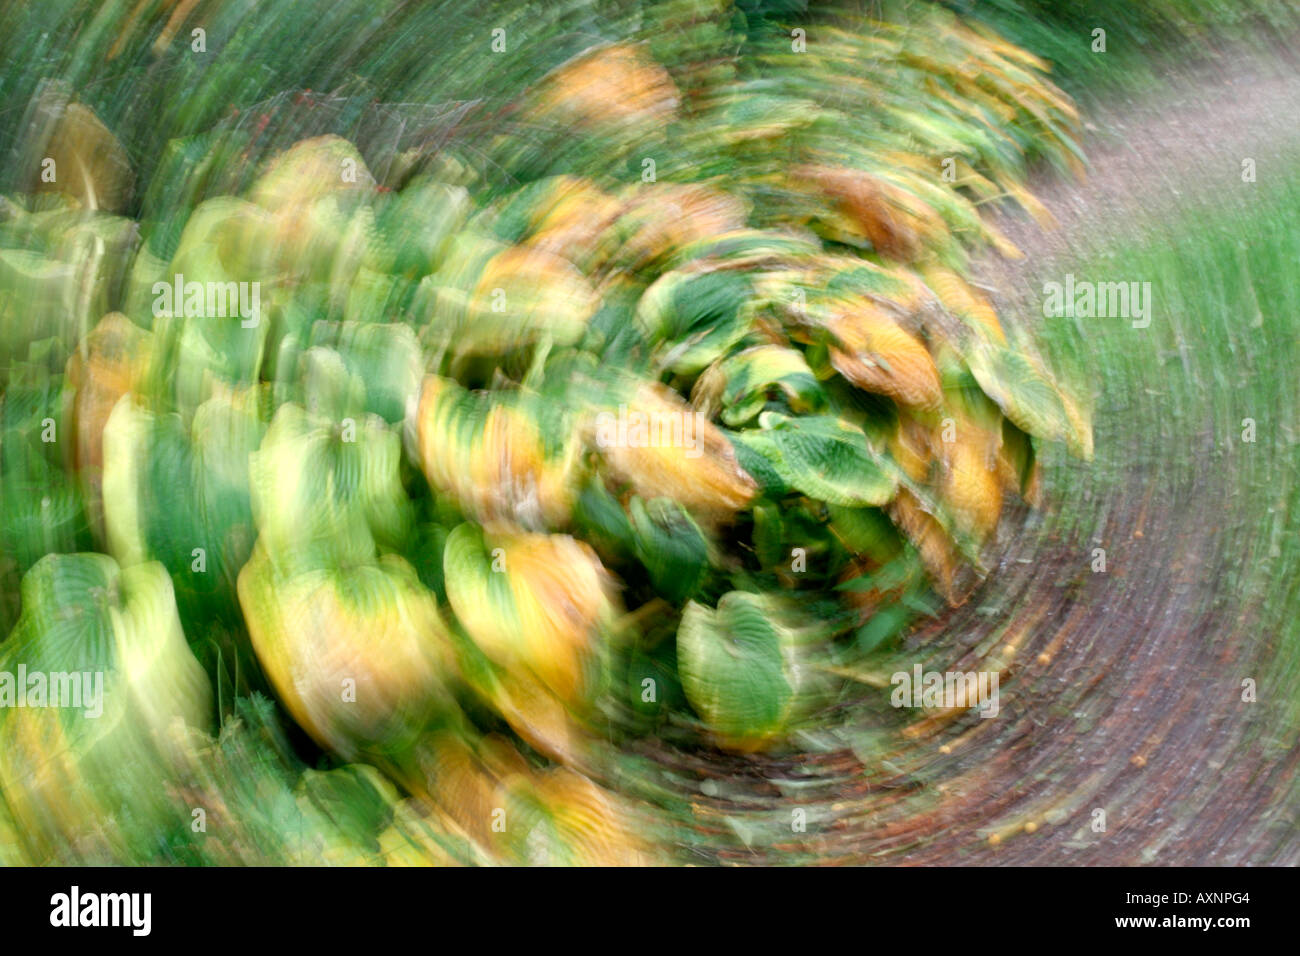 Hosta Frances Williams in a spin Stock Photo